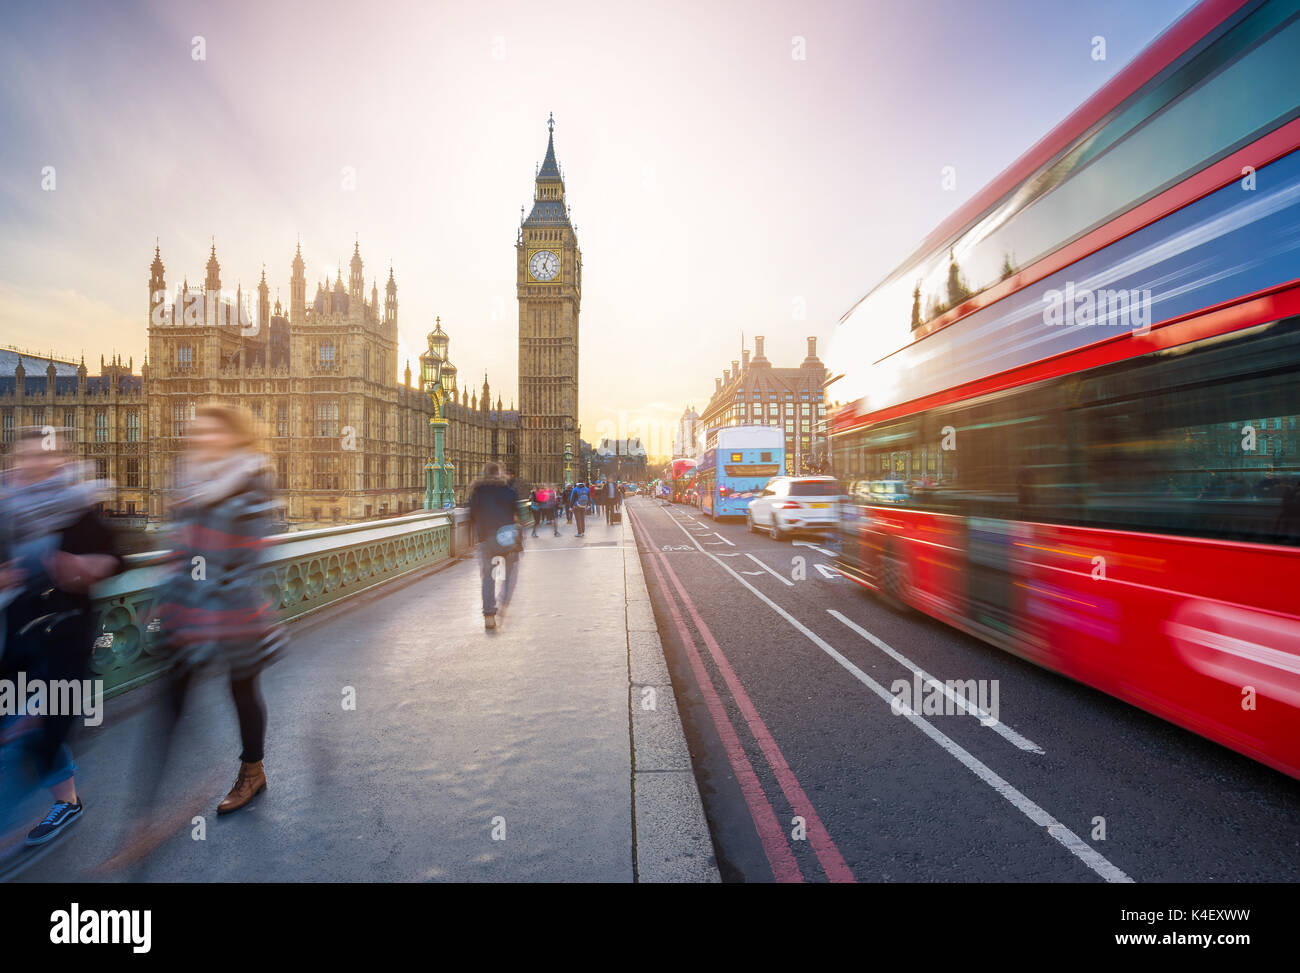 London, England - The iconic Big Ben and the Houses of Parliament with famous red double-decker bus and tourists on the move on Westminster bridge at  Stock Photo